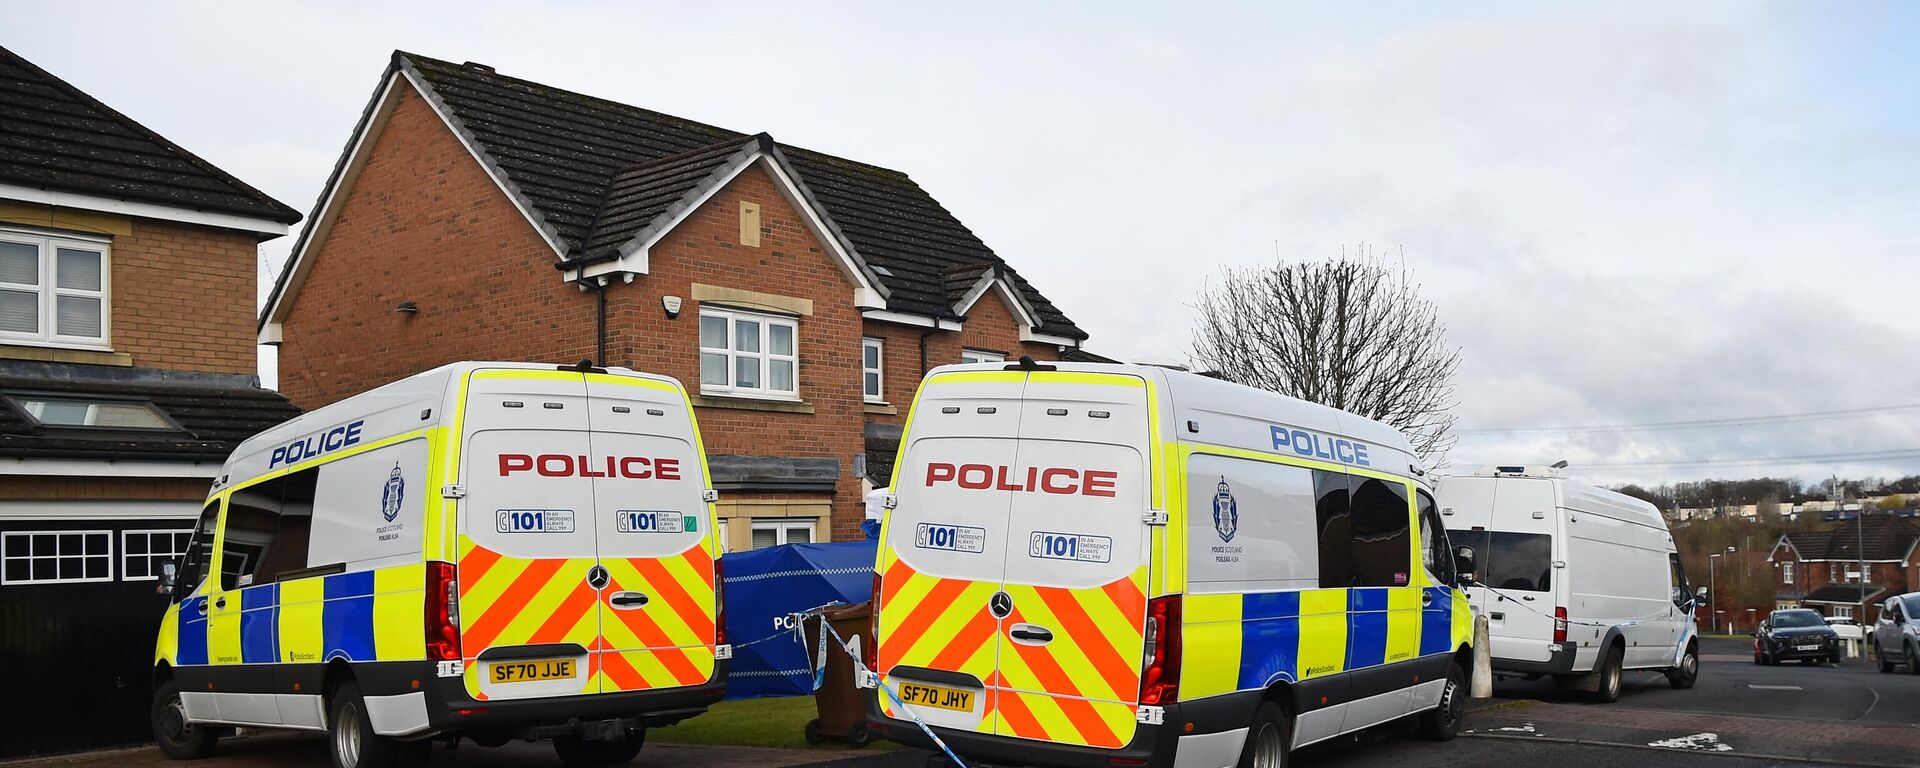 Police vans are seen outside the home of Peter Murrell, former chief executive of the Scottish National Party (SNP), and his wife, Scotland's former First Minister and former leader of the SNP, Nicola Sturgeon, in Glasgow on April 6, 2023 - Sputnik International, 1920, 06.04.2023